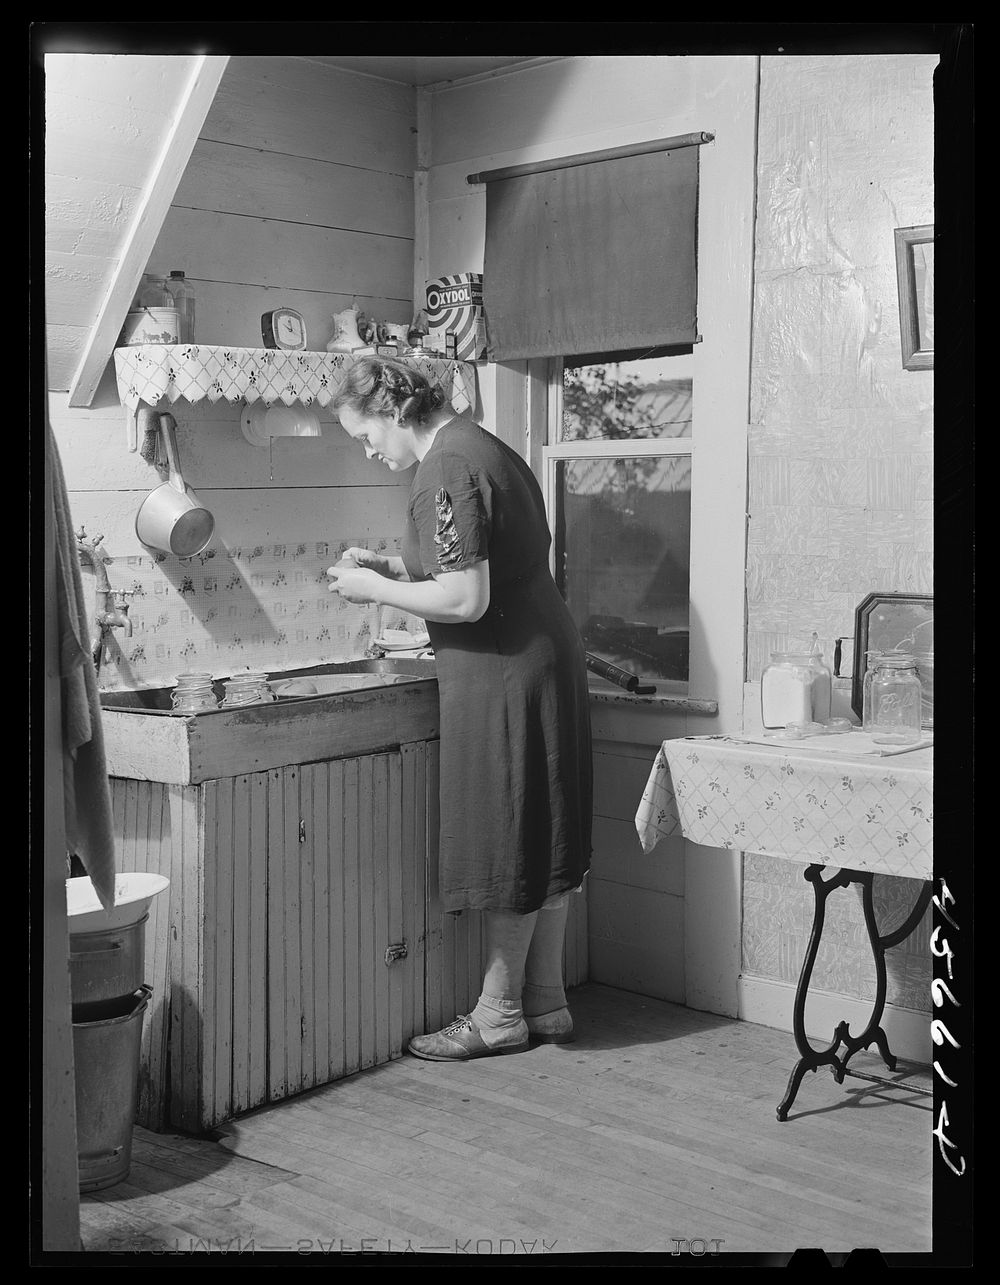 Mrs. W. Gaynor canning tomatoes on their farm near Fairfield, Vermont. Sourced from the Library of Congress.